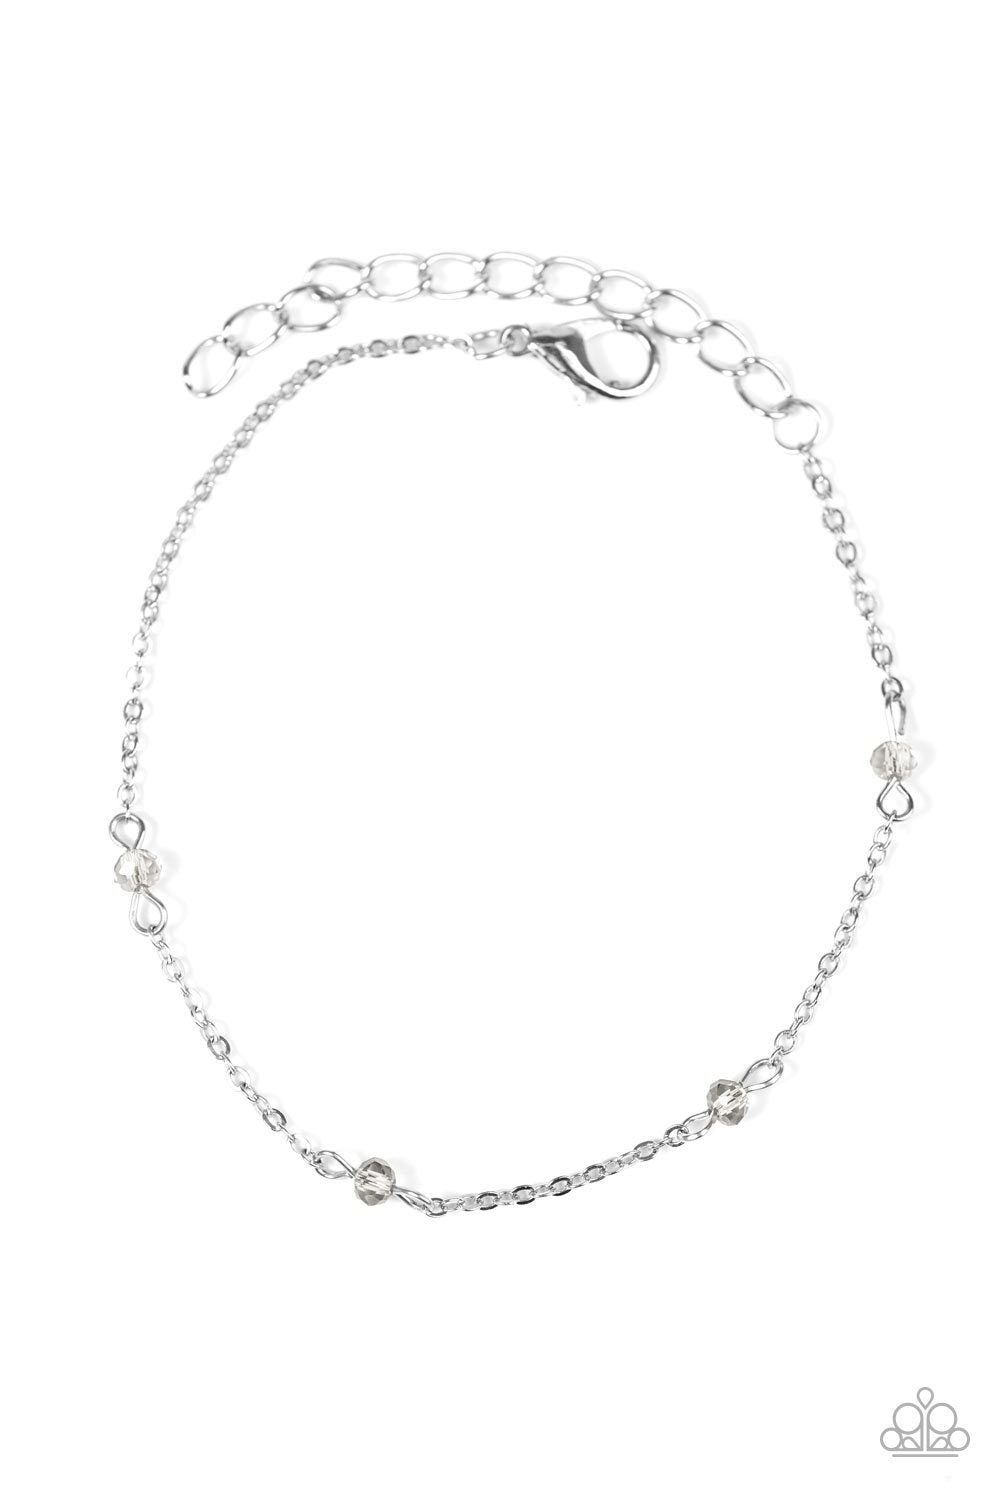 A Pinch of Sparkle Silver Bracelet - Paparazzi Accessories-CarasShop.com - $5 Jewelry by Cara Jewels